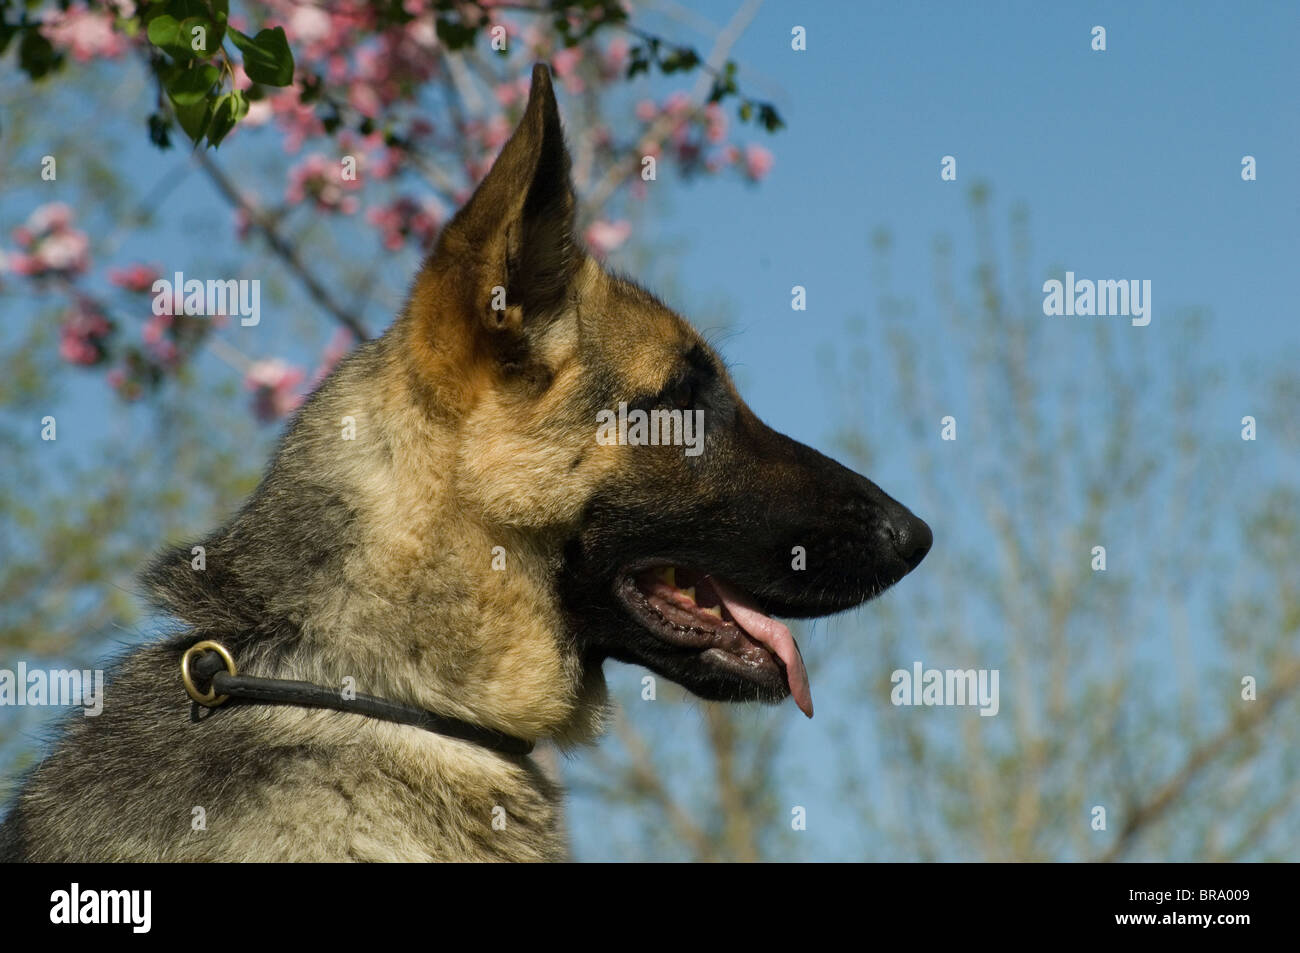 PROFILE HEAD GERMAN SHEPHERD DOG OUTDOOR SPRING BLOSSOM IN BACKGROUND Stock Photo